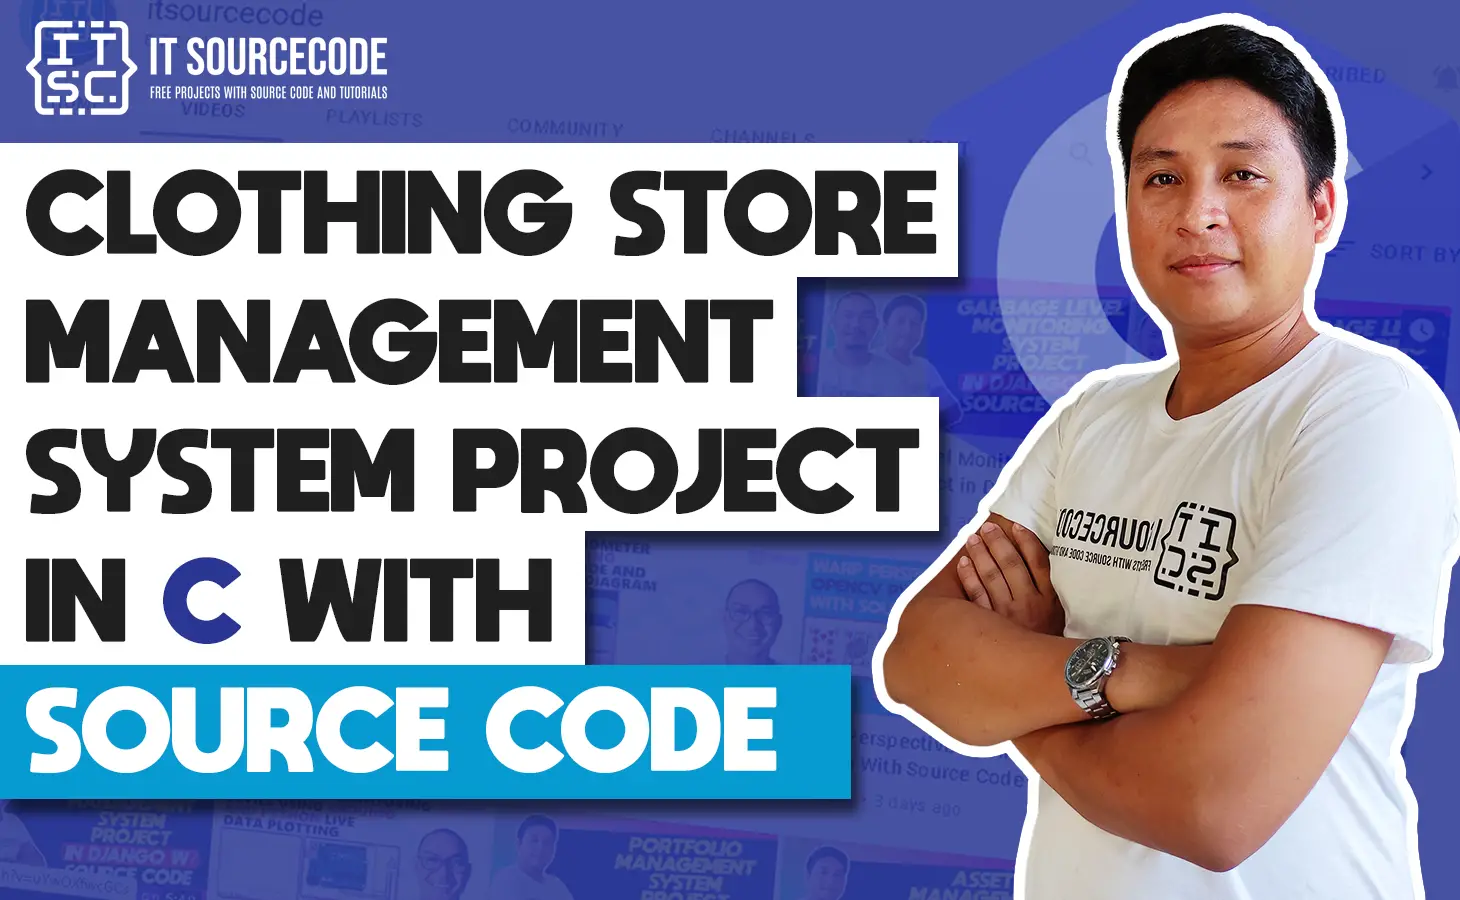 clothing store management system project in c with Source Code